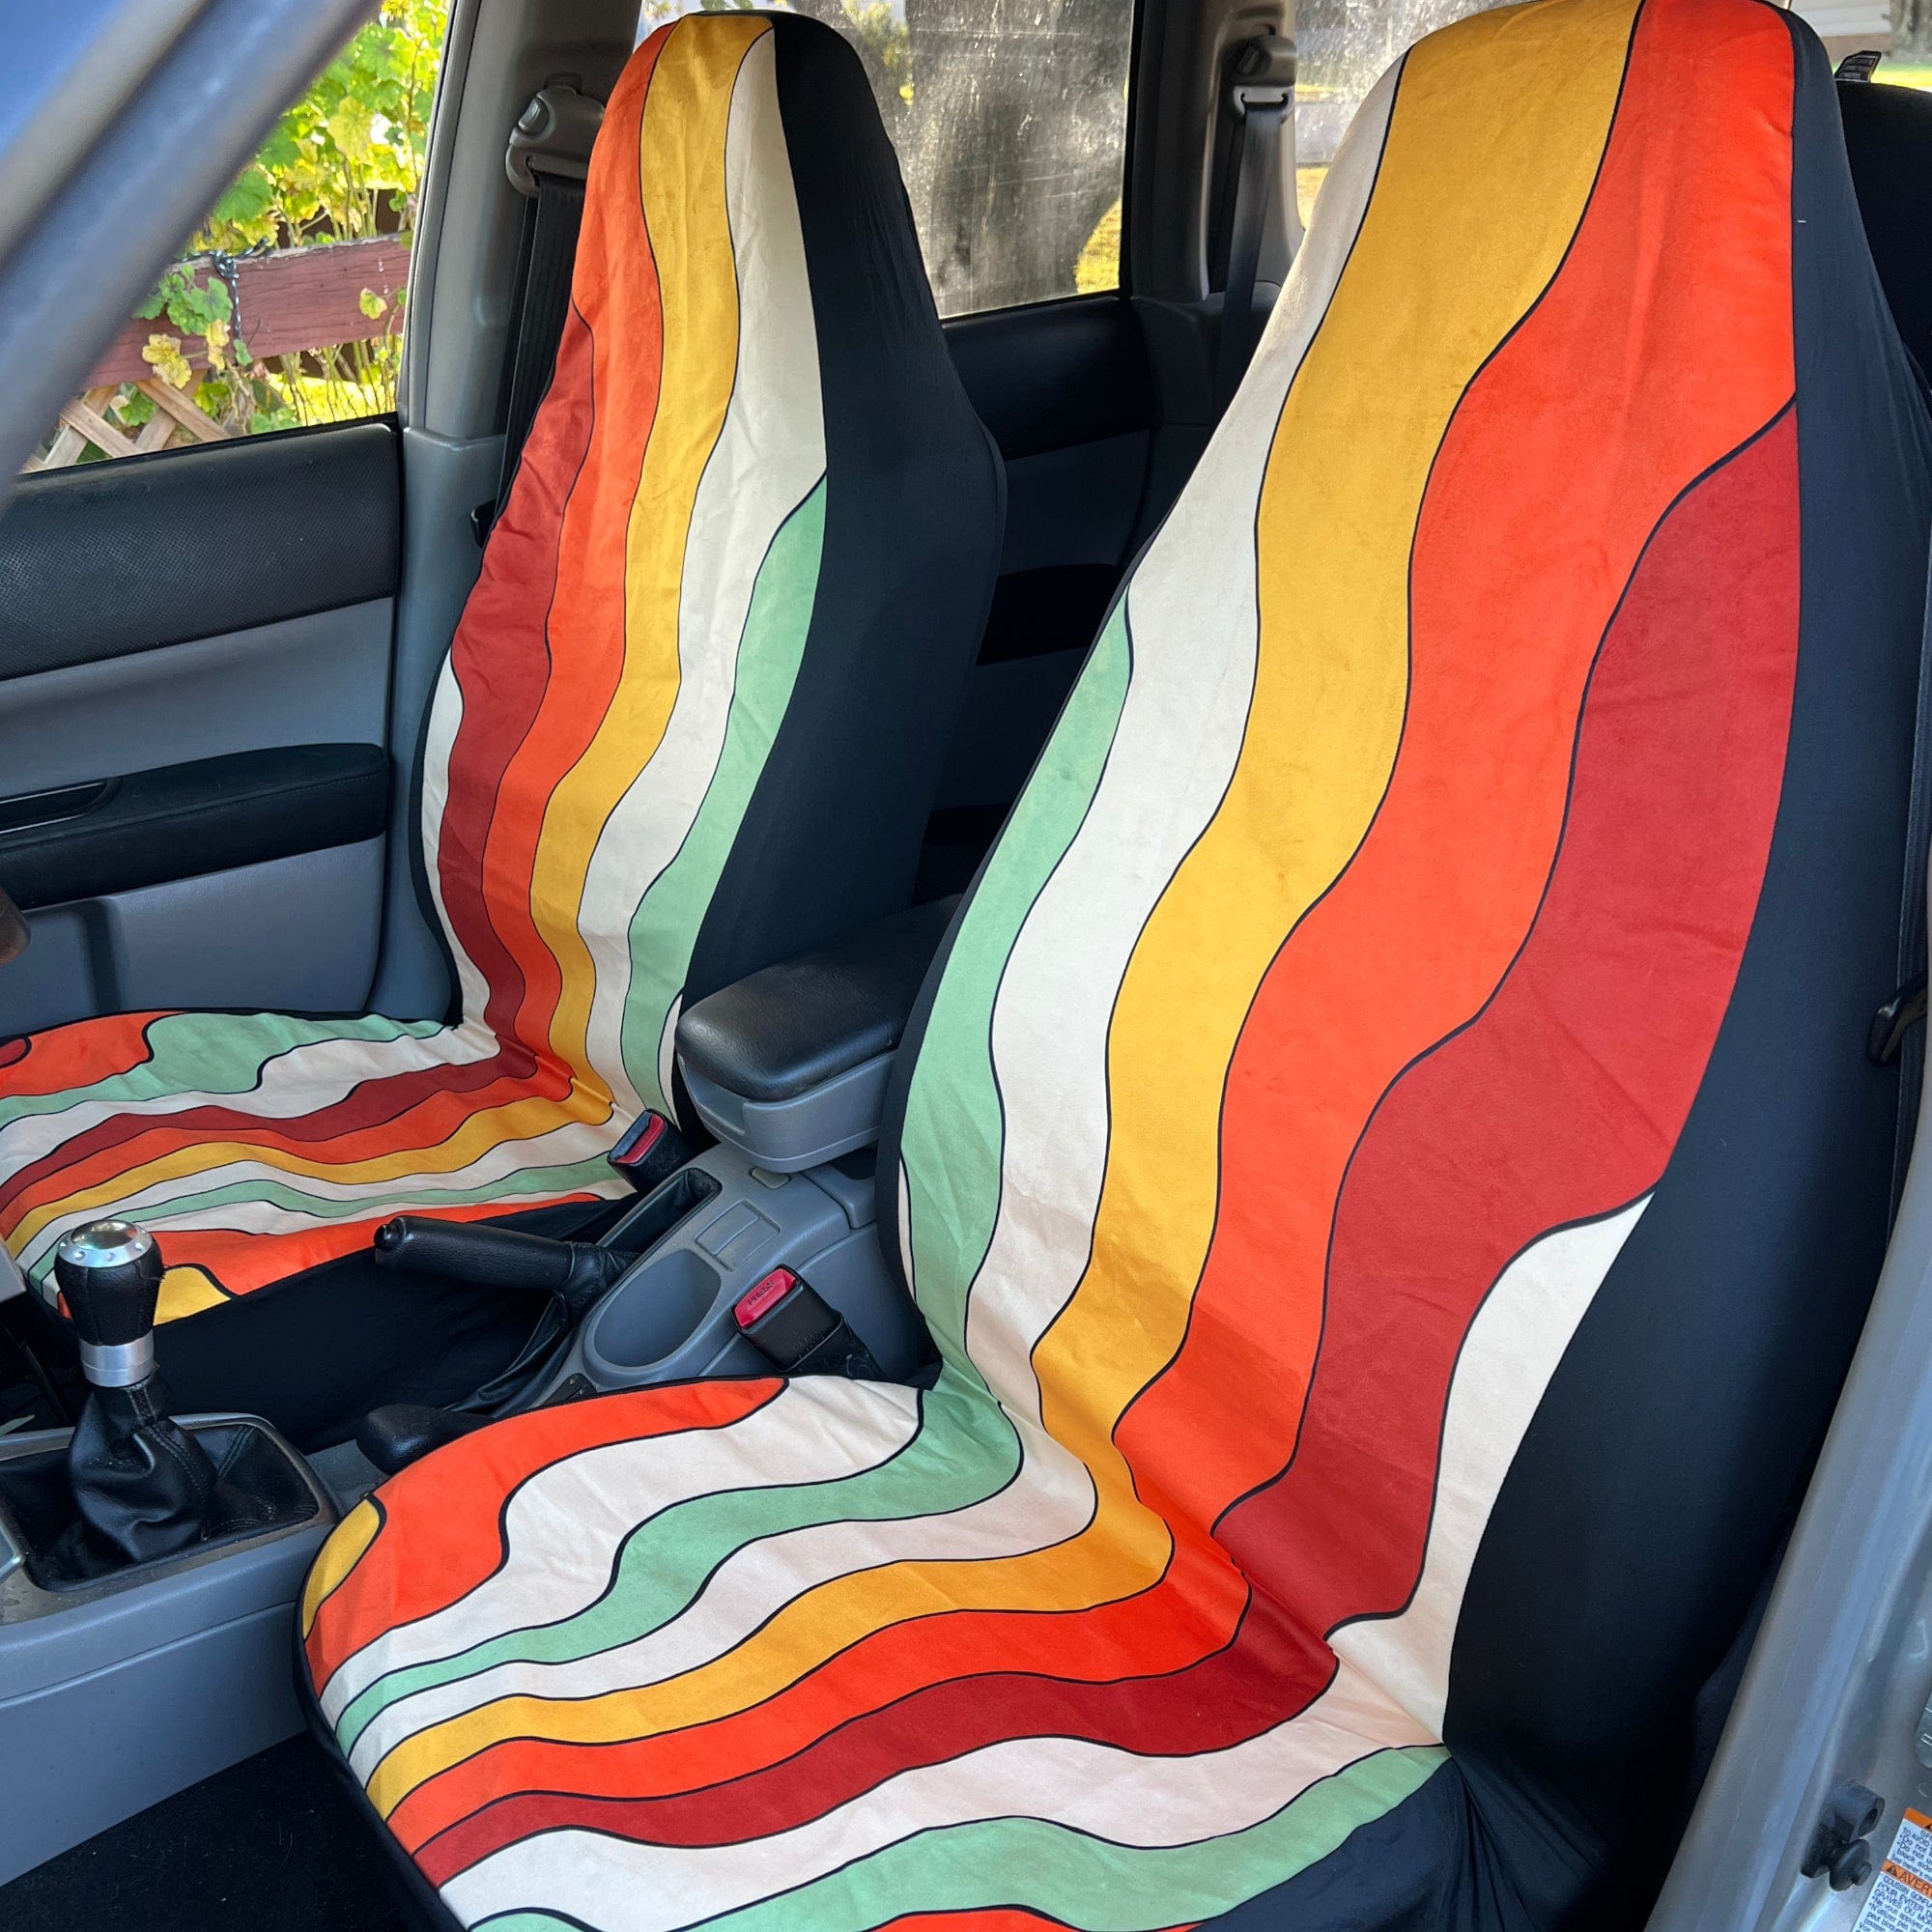 Groovy Flower Car Seat Covers for Vehicle 2 Pc, Vintage Floral 70s Hippie  Cute Front Car SUV Vans Gift Her Women Truck Protector Accessory -   Norway